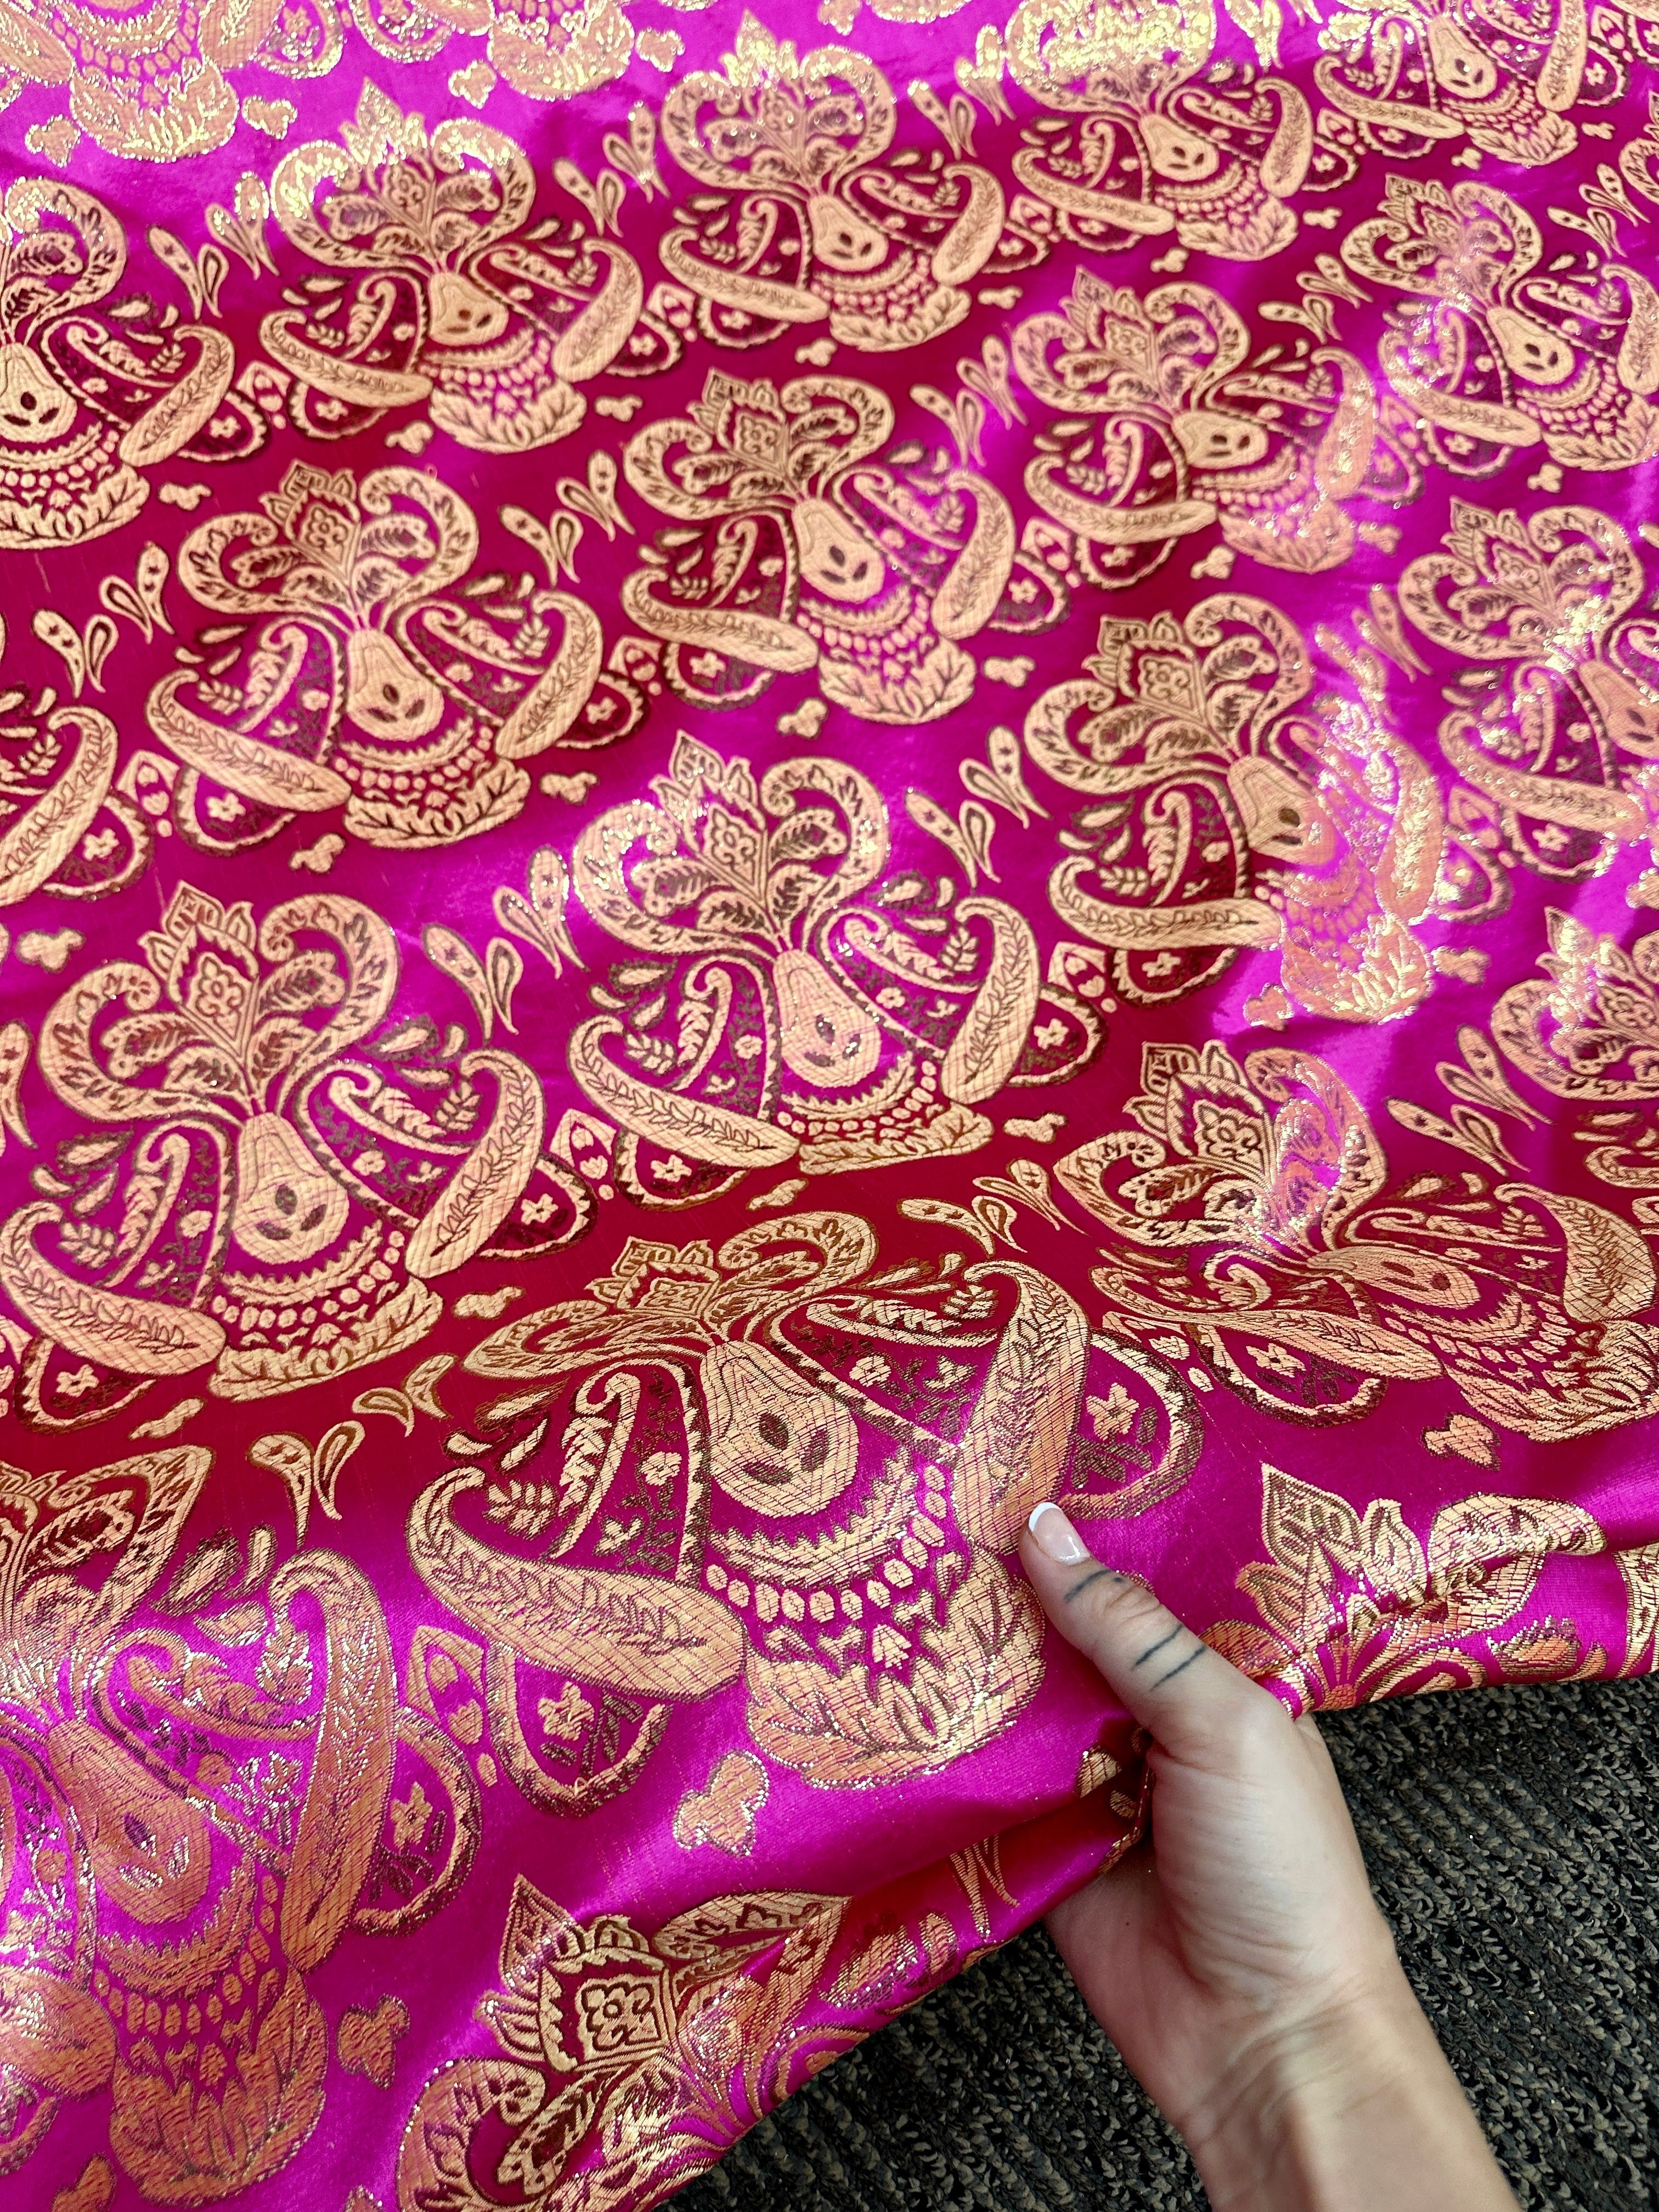 Fuchsia gold chinese Brocade, gold brocade, fuchsia brocade, pink brocade, chinese brocade for brazers, brocade for woman, brocade for bride, premium brocade, brocade in low price, best quality brocade